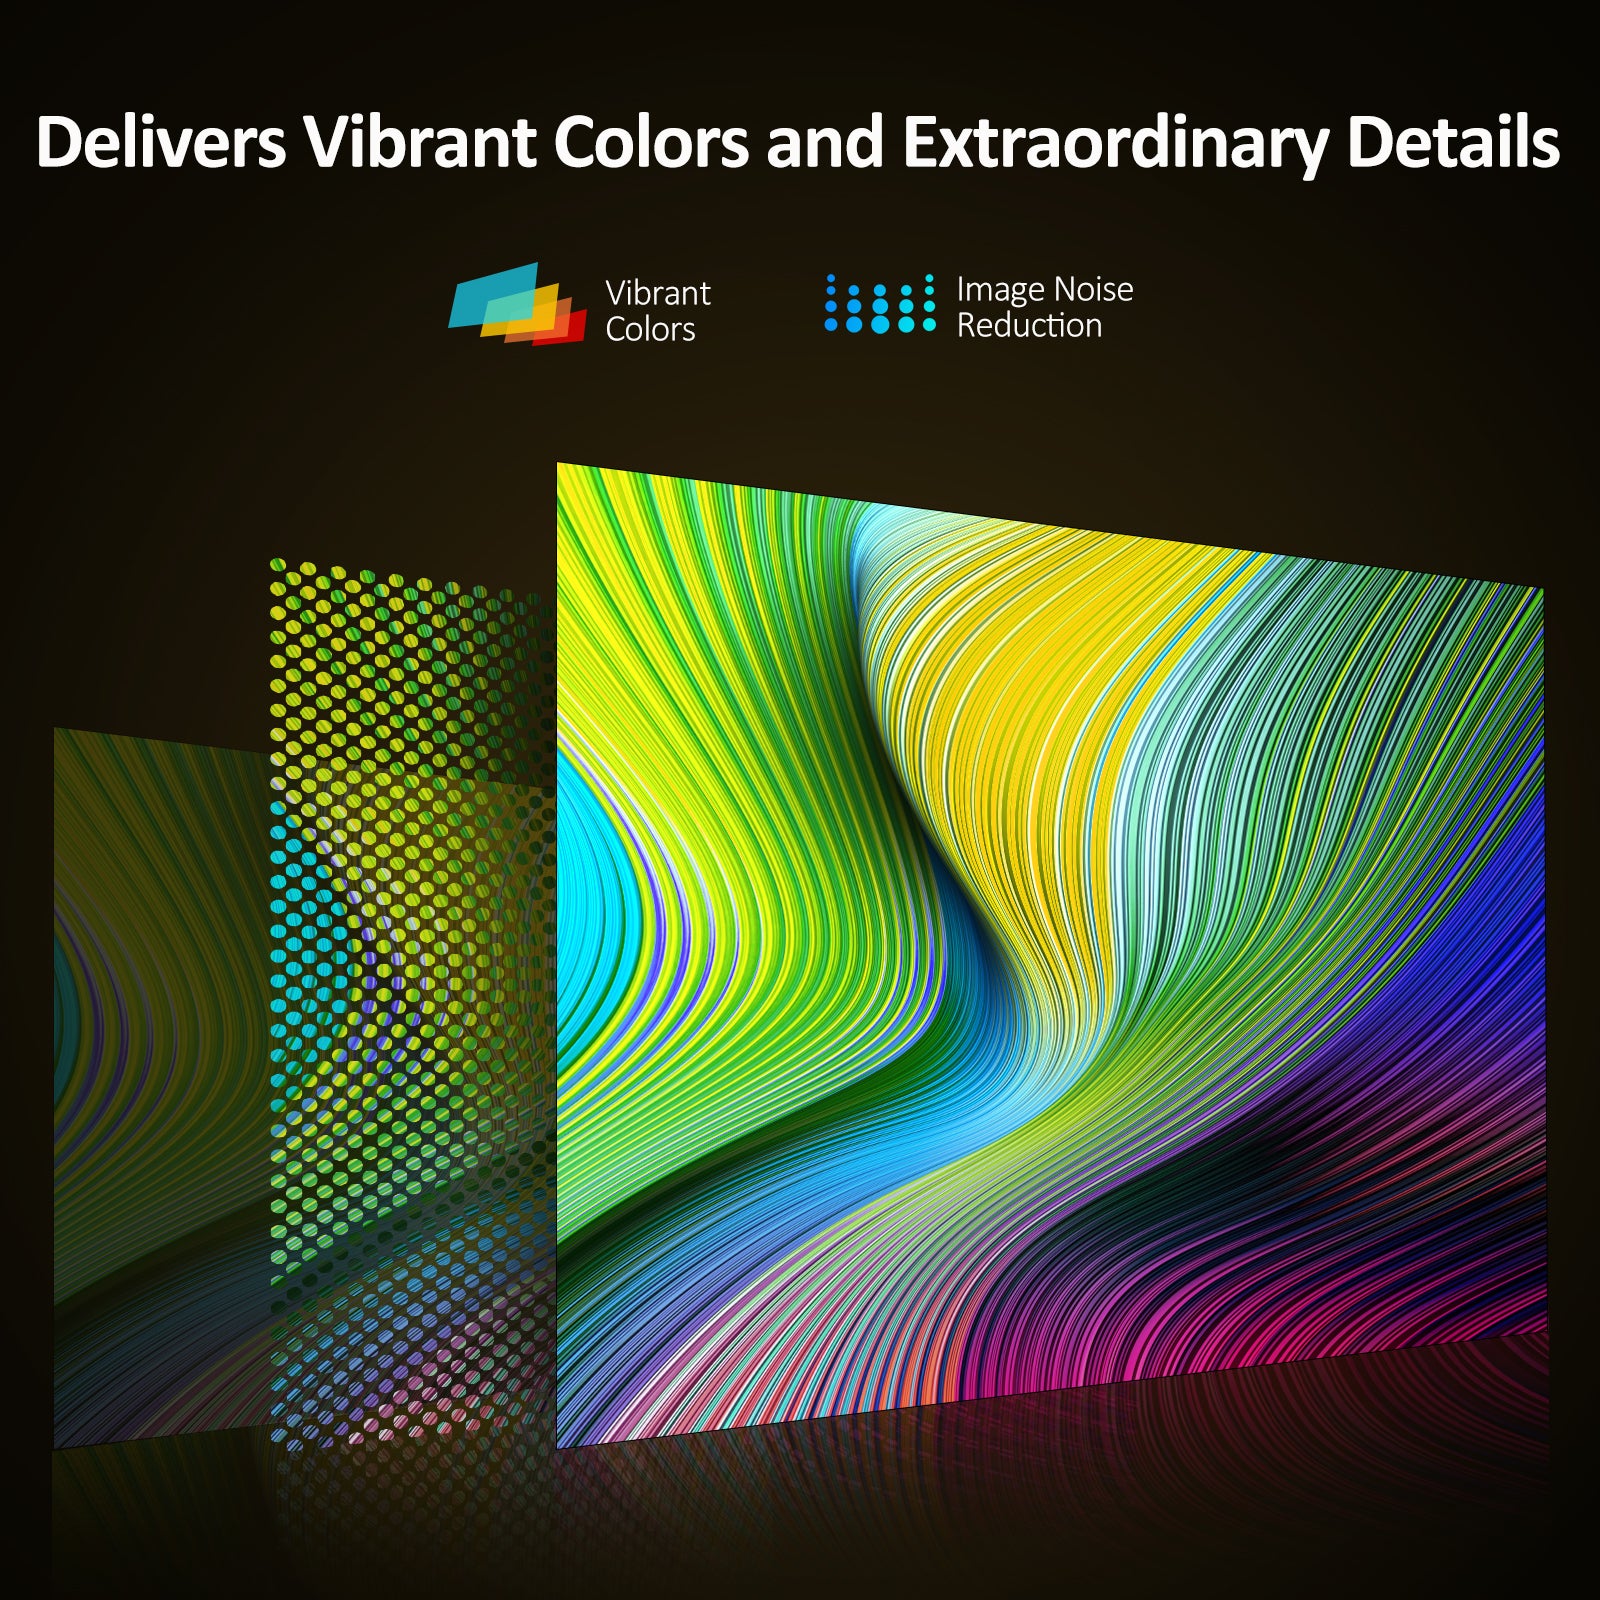 Vibrant colors and high-quality detail display, with image noise reduction.